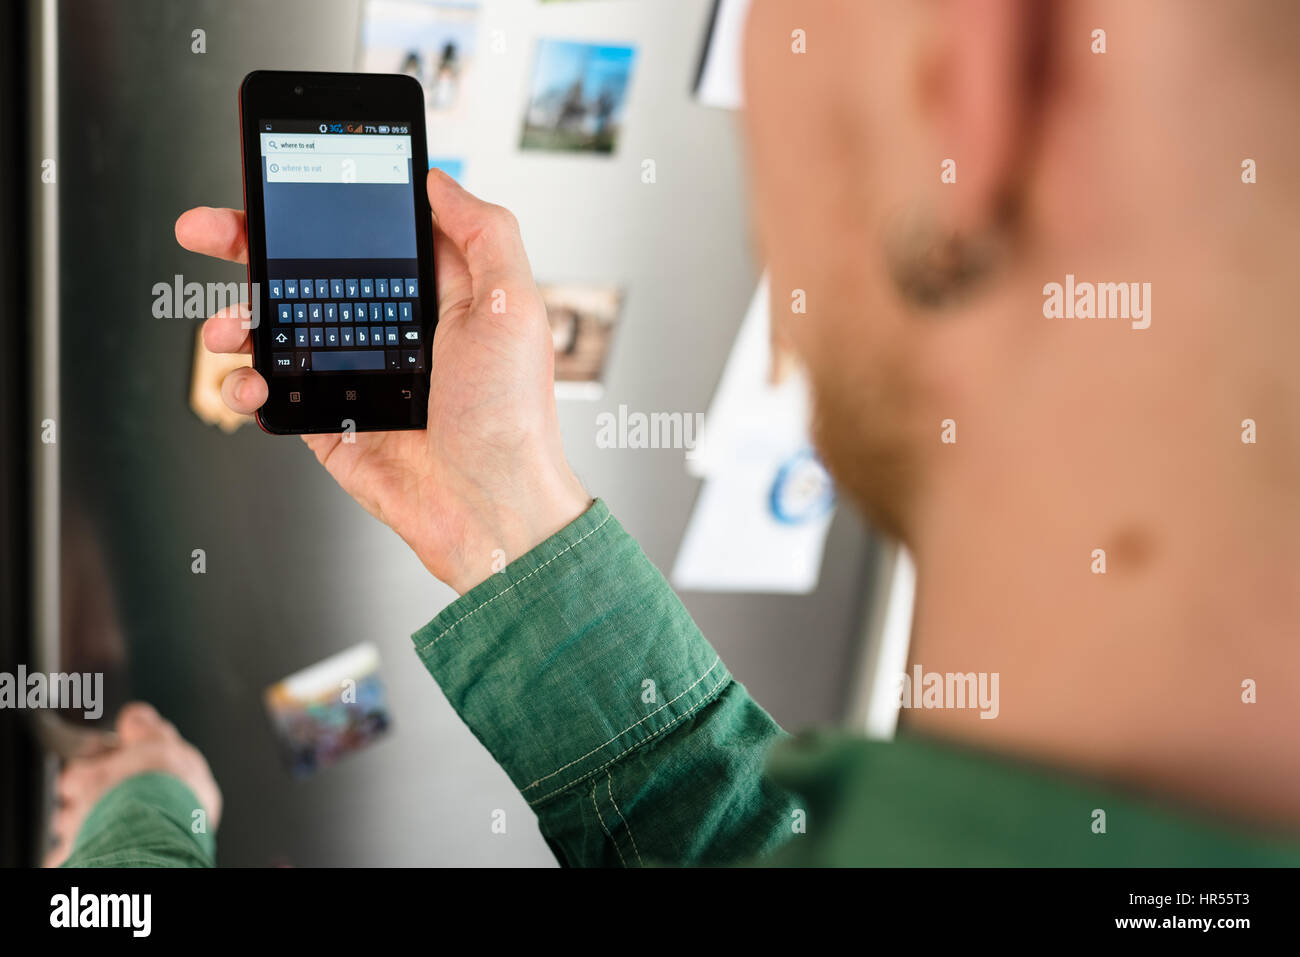 Close-up of person hands holding smartphone showing web browser search tool with virtual keyboard on screen and searching online for places to eat. Re Stock Photo